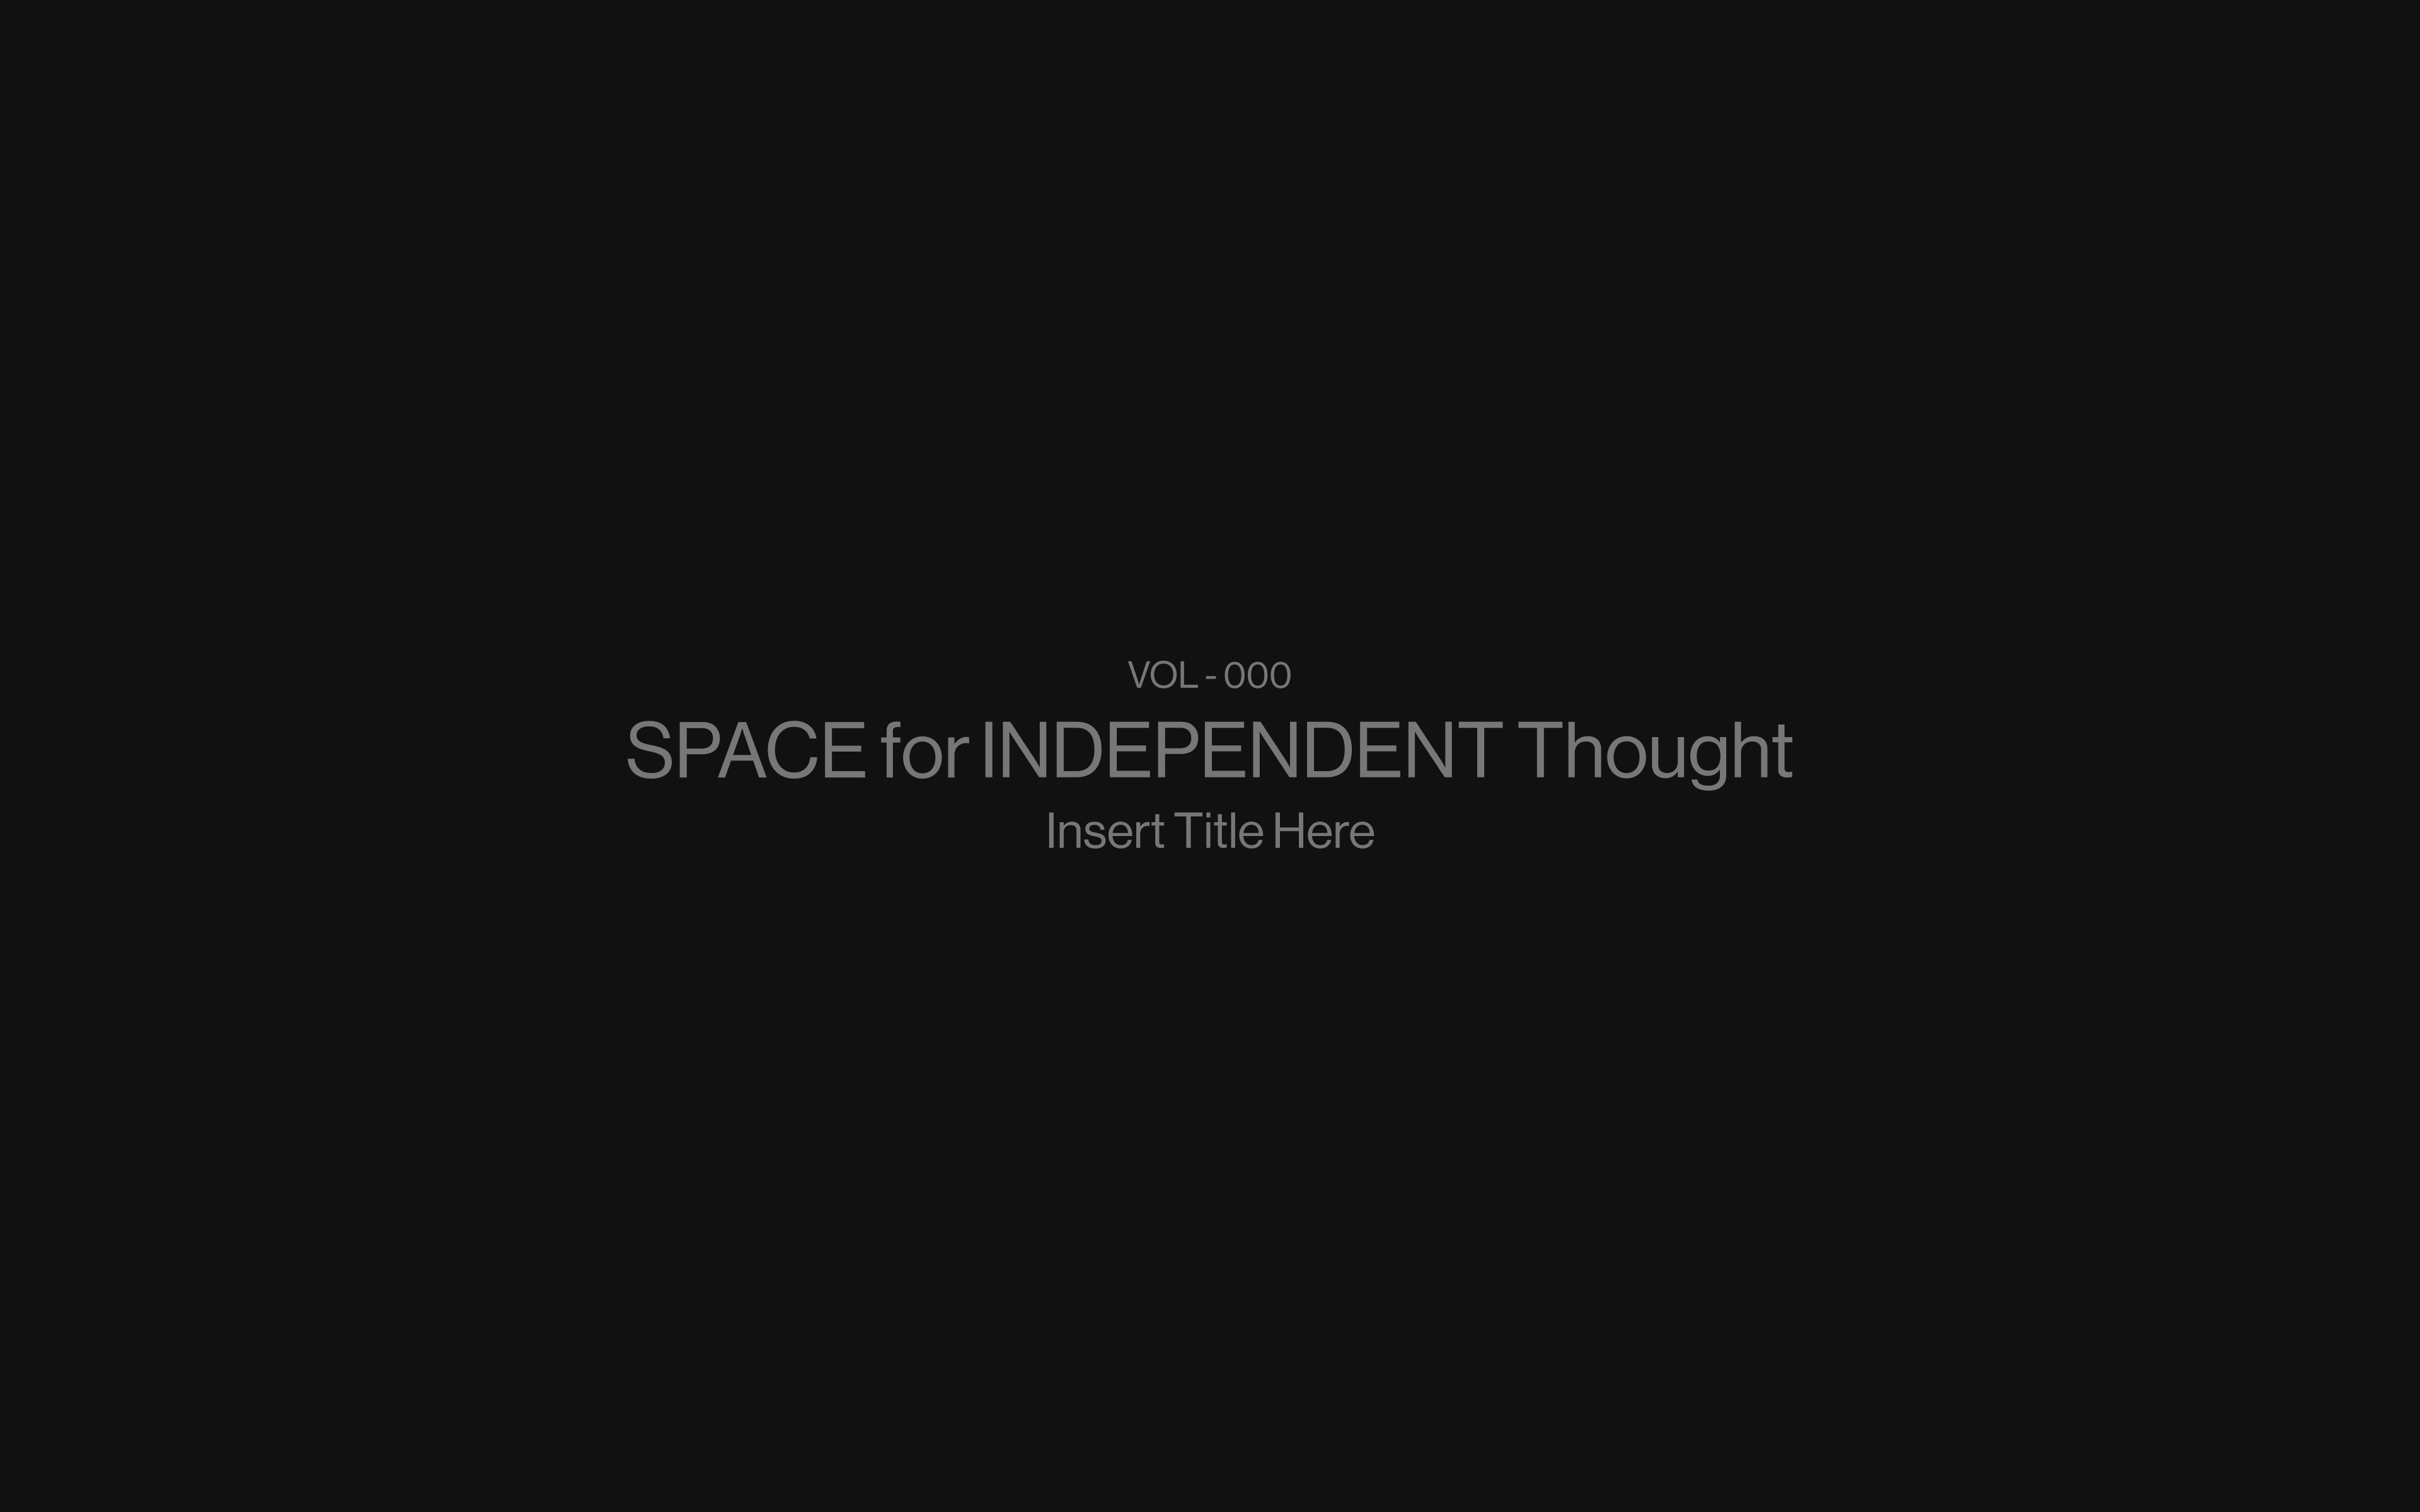 Space for Independent Thought